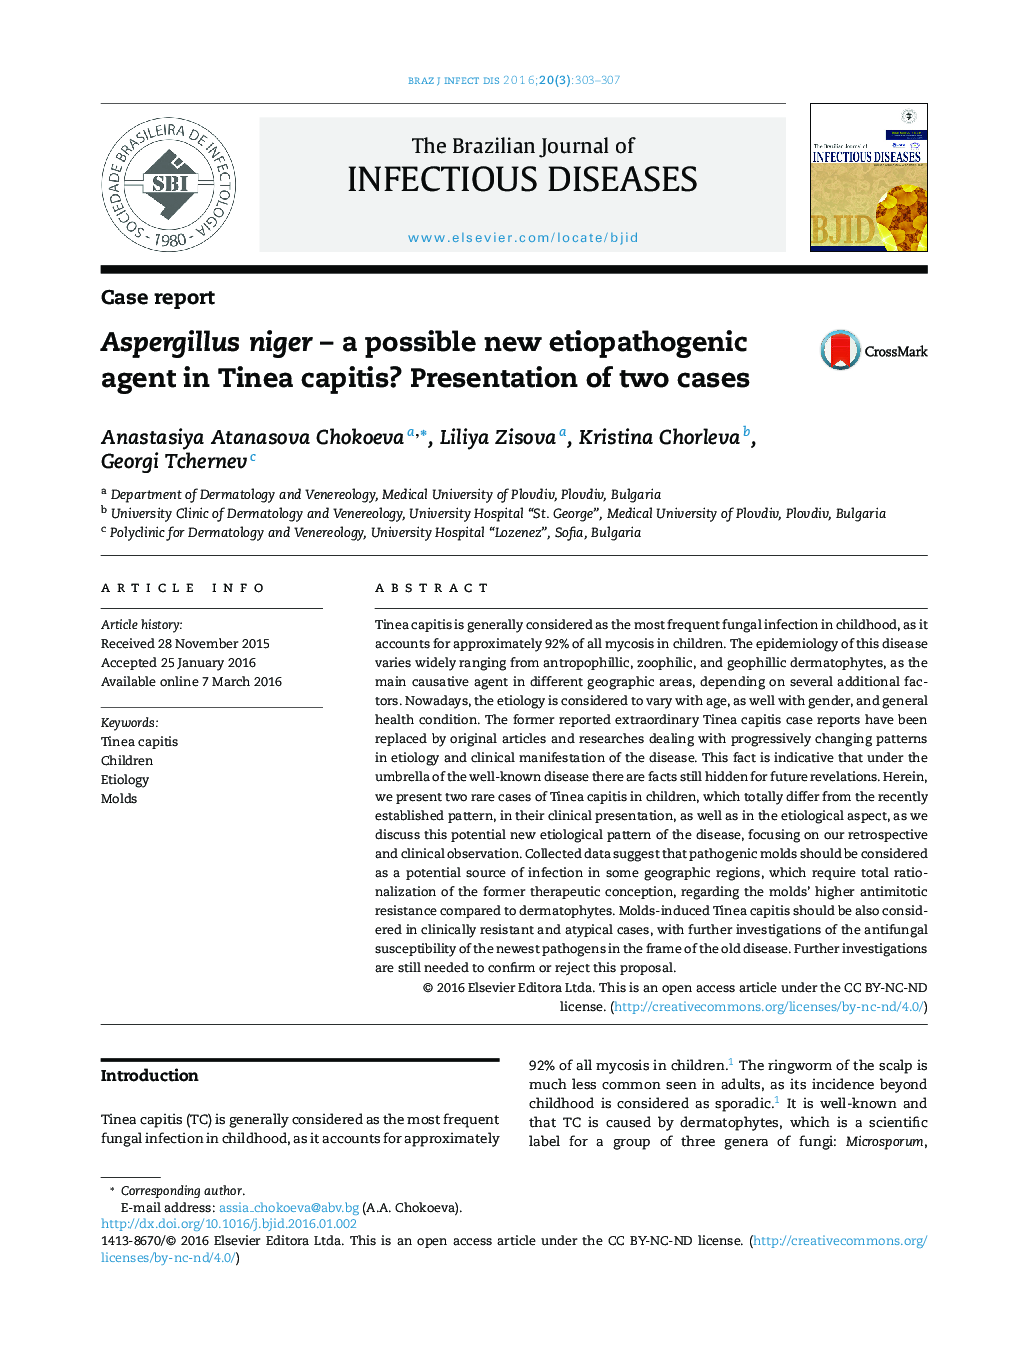 Aspergillus niger – a possible new etiopathogenic agent in Tinea capitis? Presentation of two cases